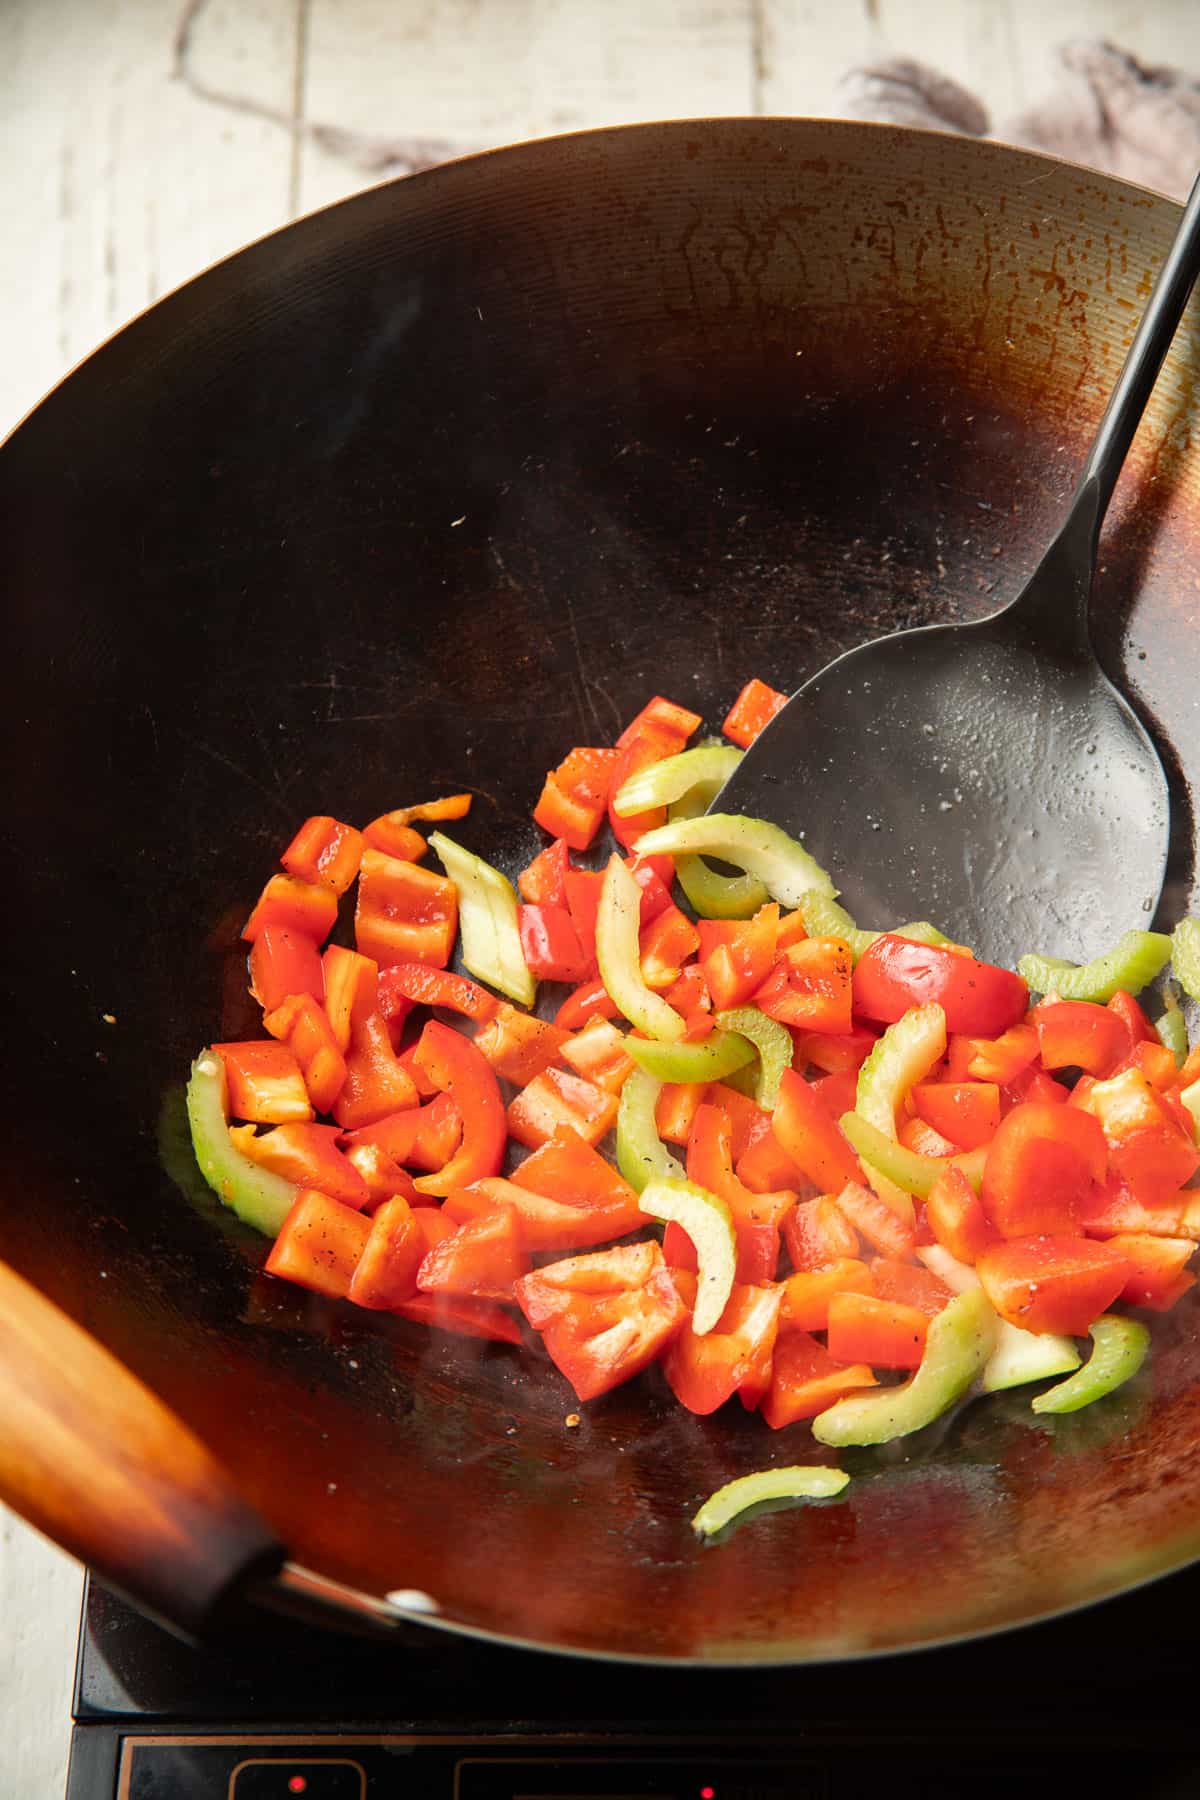 Red bell pepper and celery cooking in a wok.